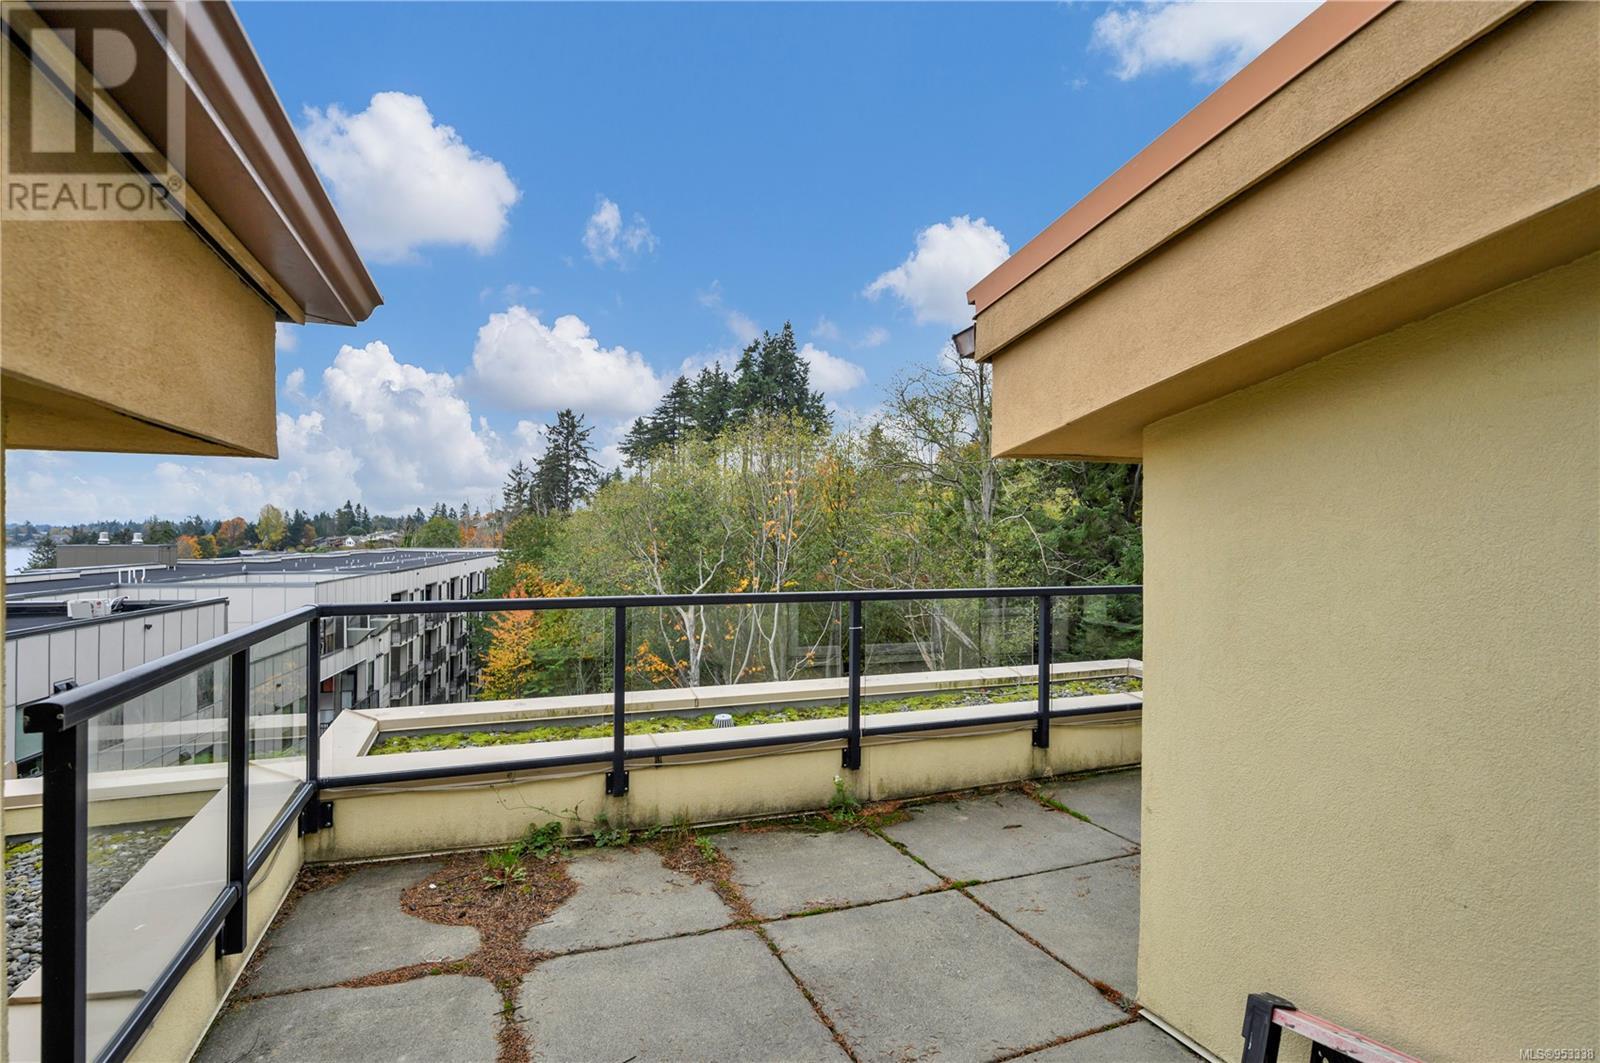 405 1392 Island Hwy S, Campbell River